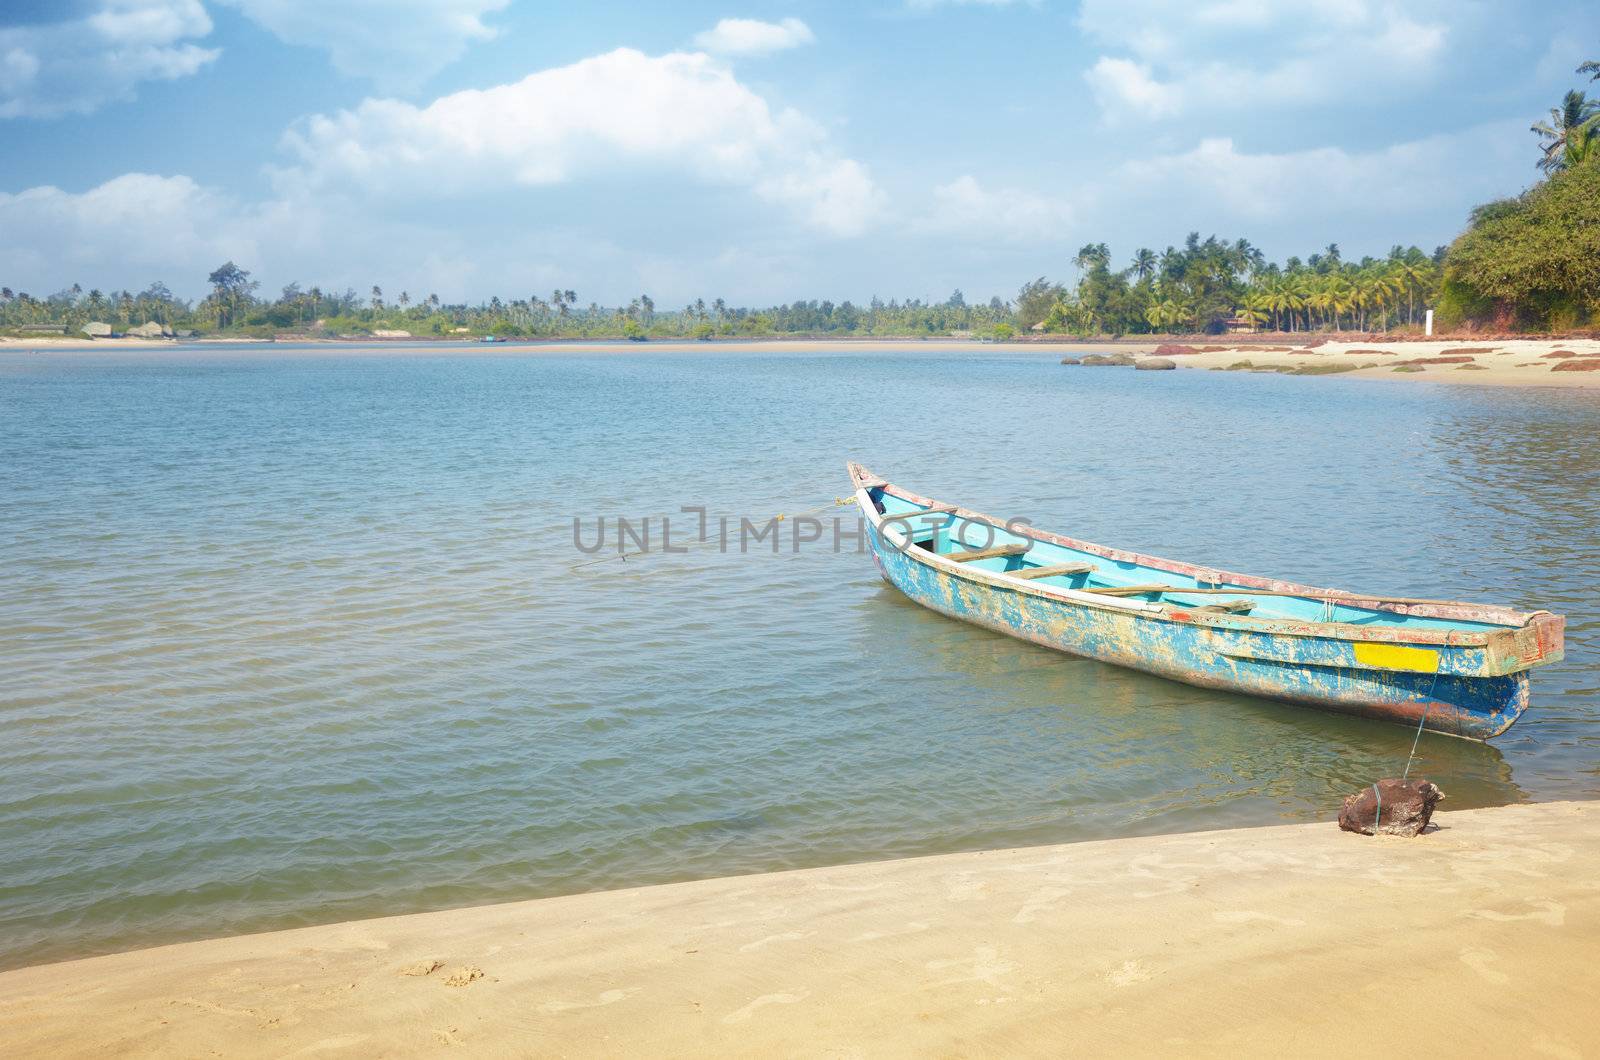 Small fish boat at the tropical coast. Outdoors photo with vibrant colors